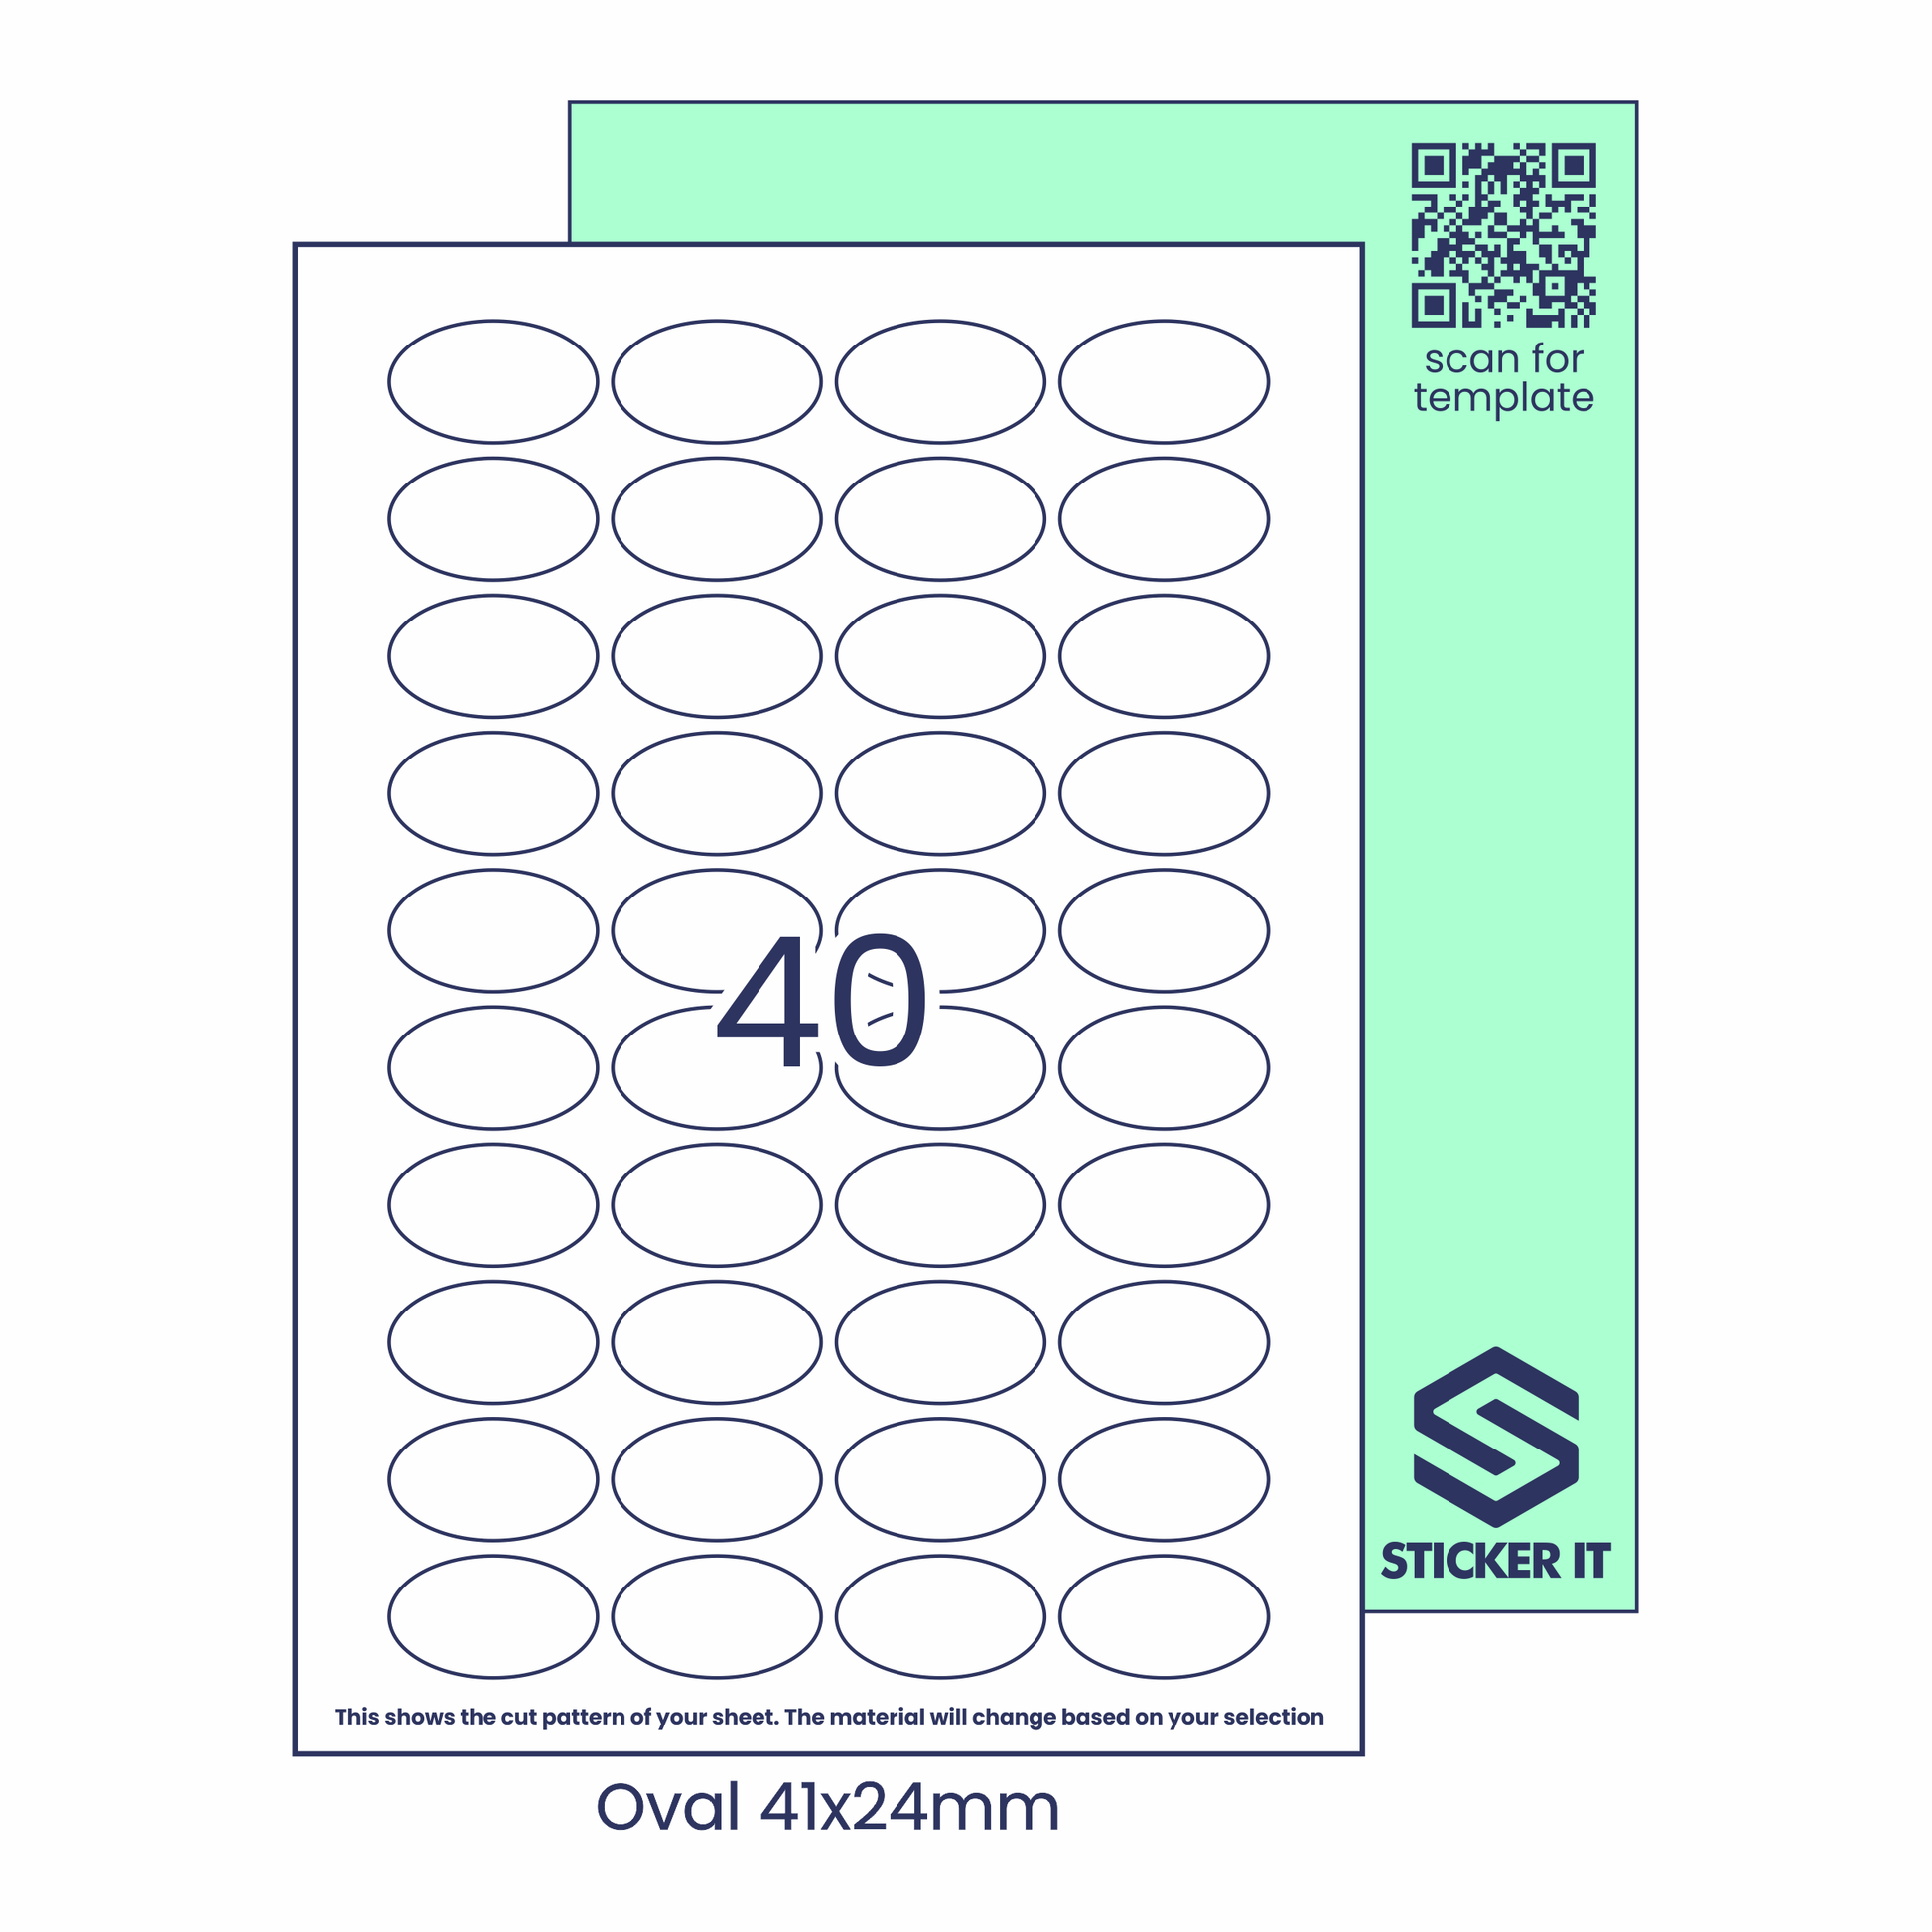 Blank labels oval 41x24 40 image